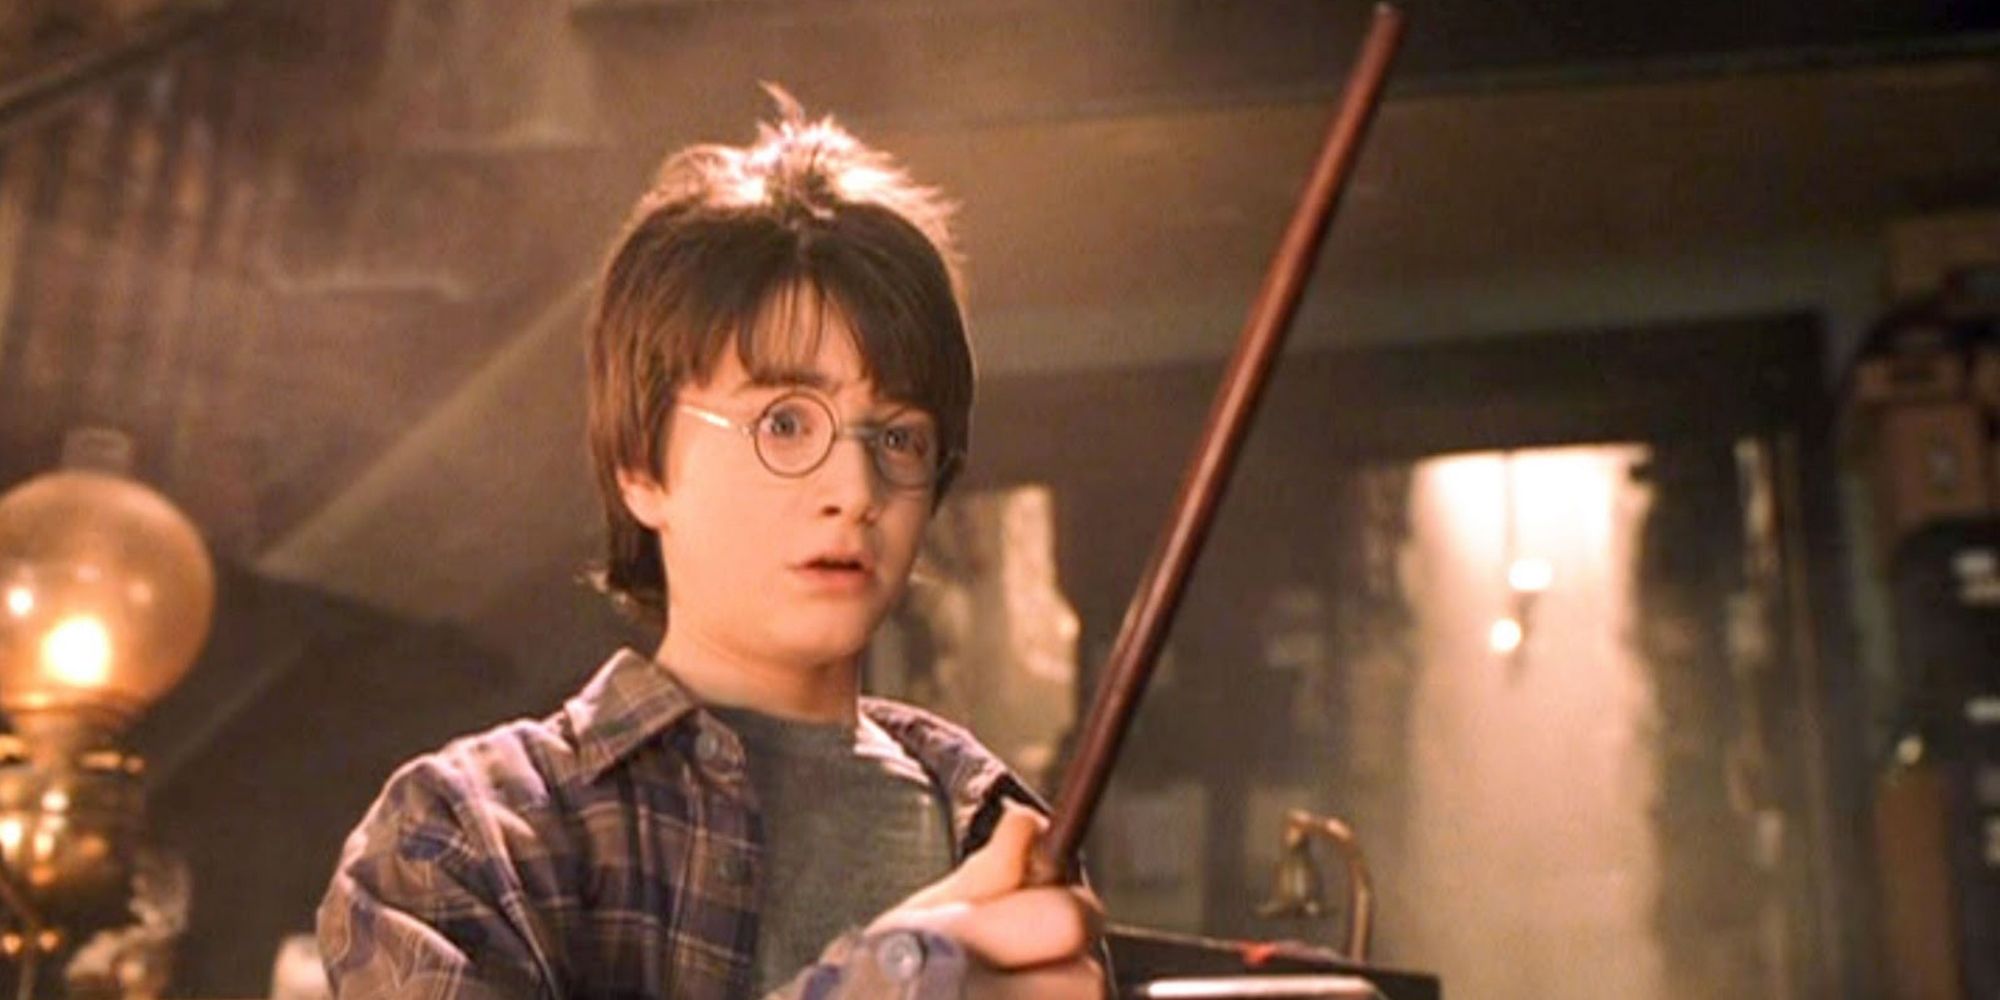 Dnaiel Radcliffe as Harry Potter looking in awe while holding his first wand in 'Harry Potter and The Sorcerer's Stone'